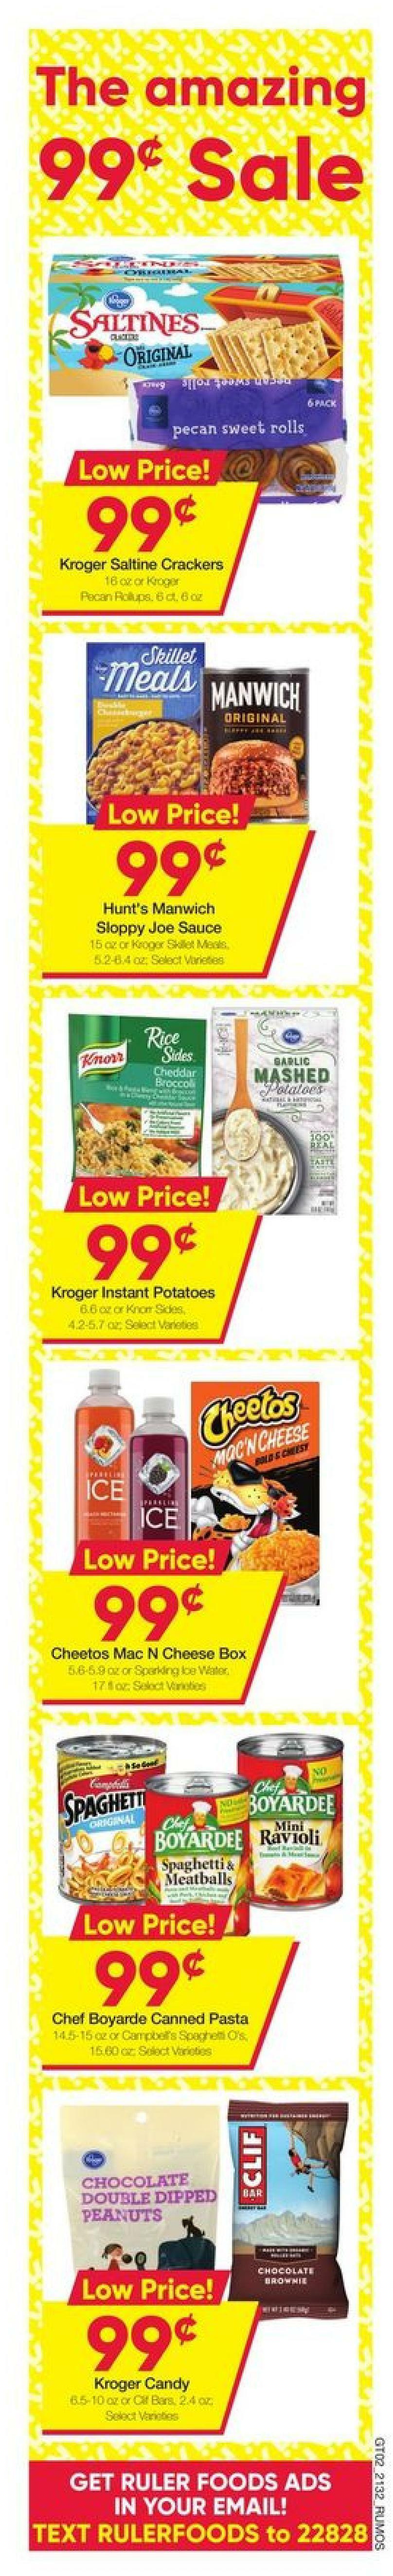 Ruler Foods Weekly Ad from September 8